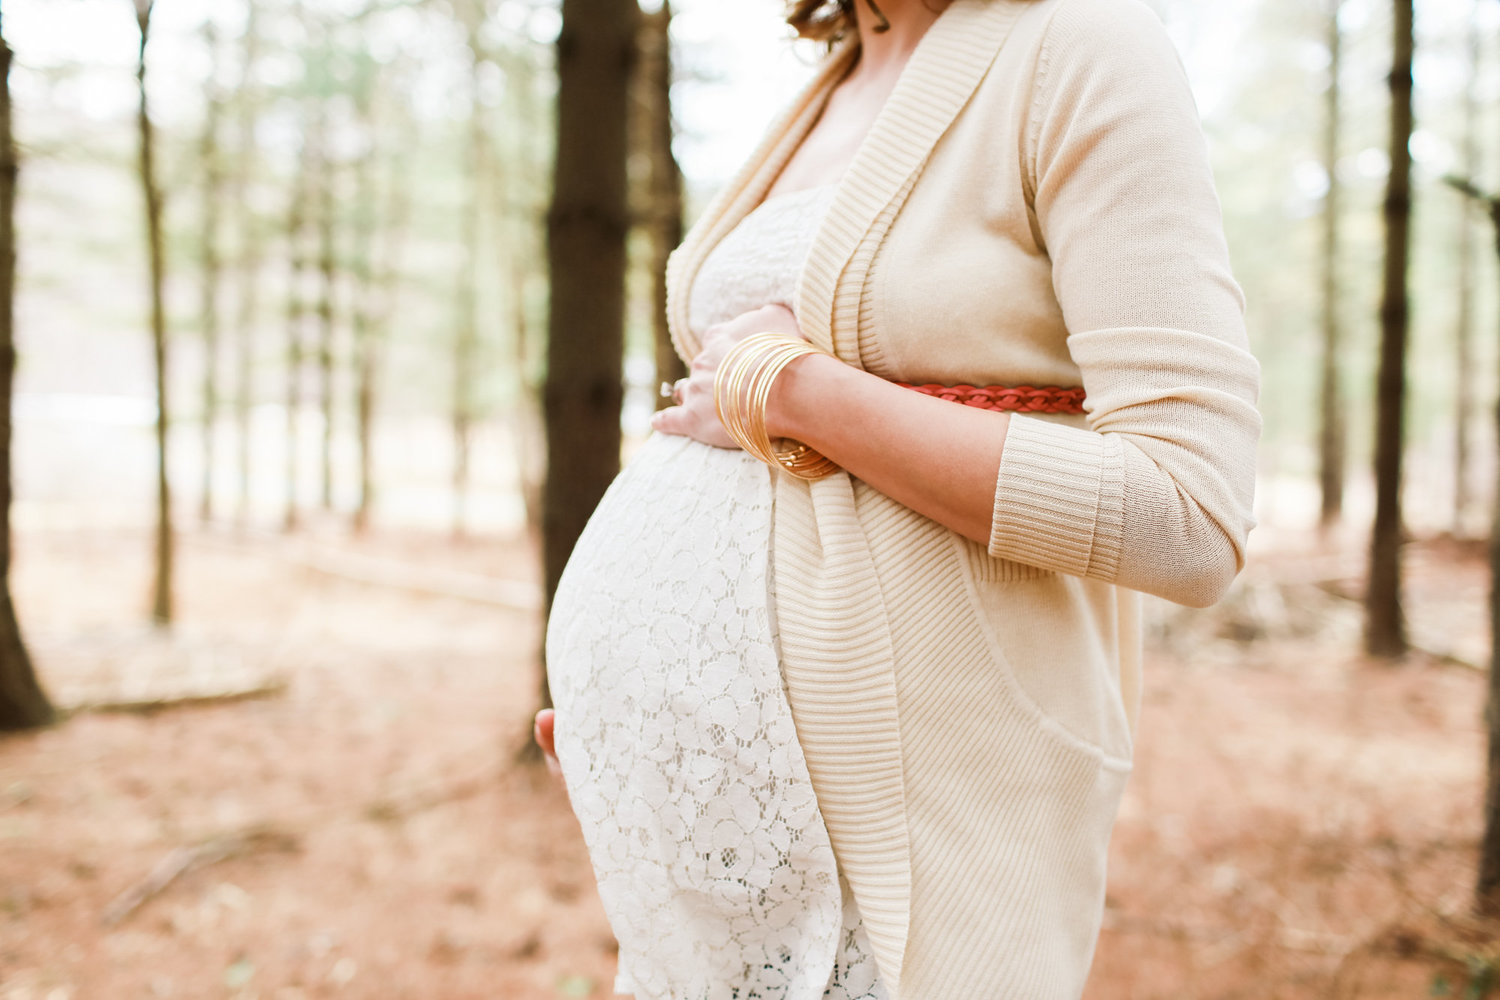 Pregnancy and Fertility: Advice, Support and Procedures